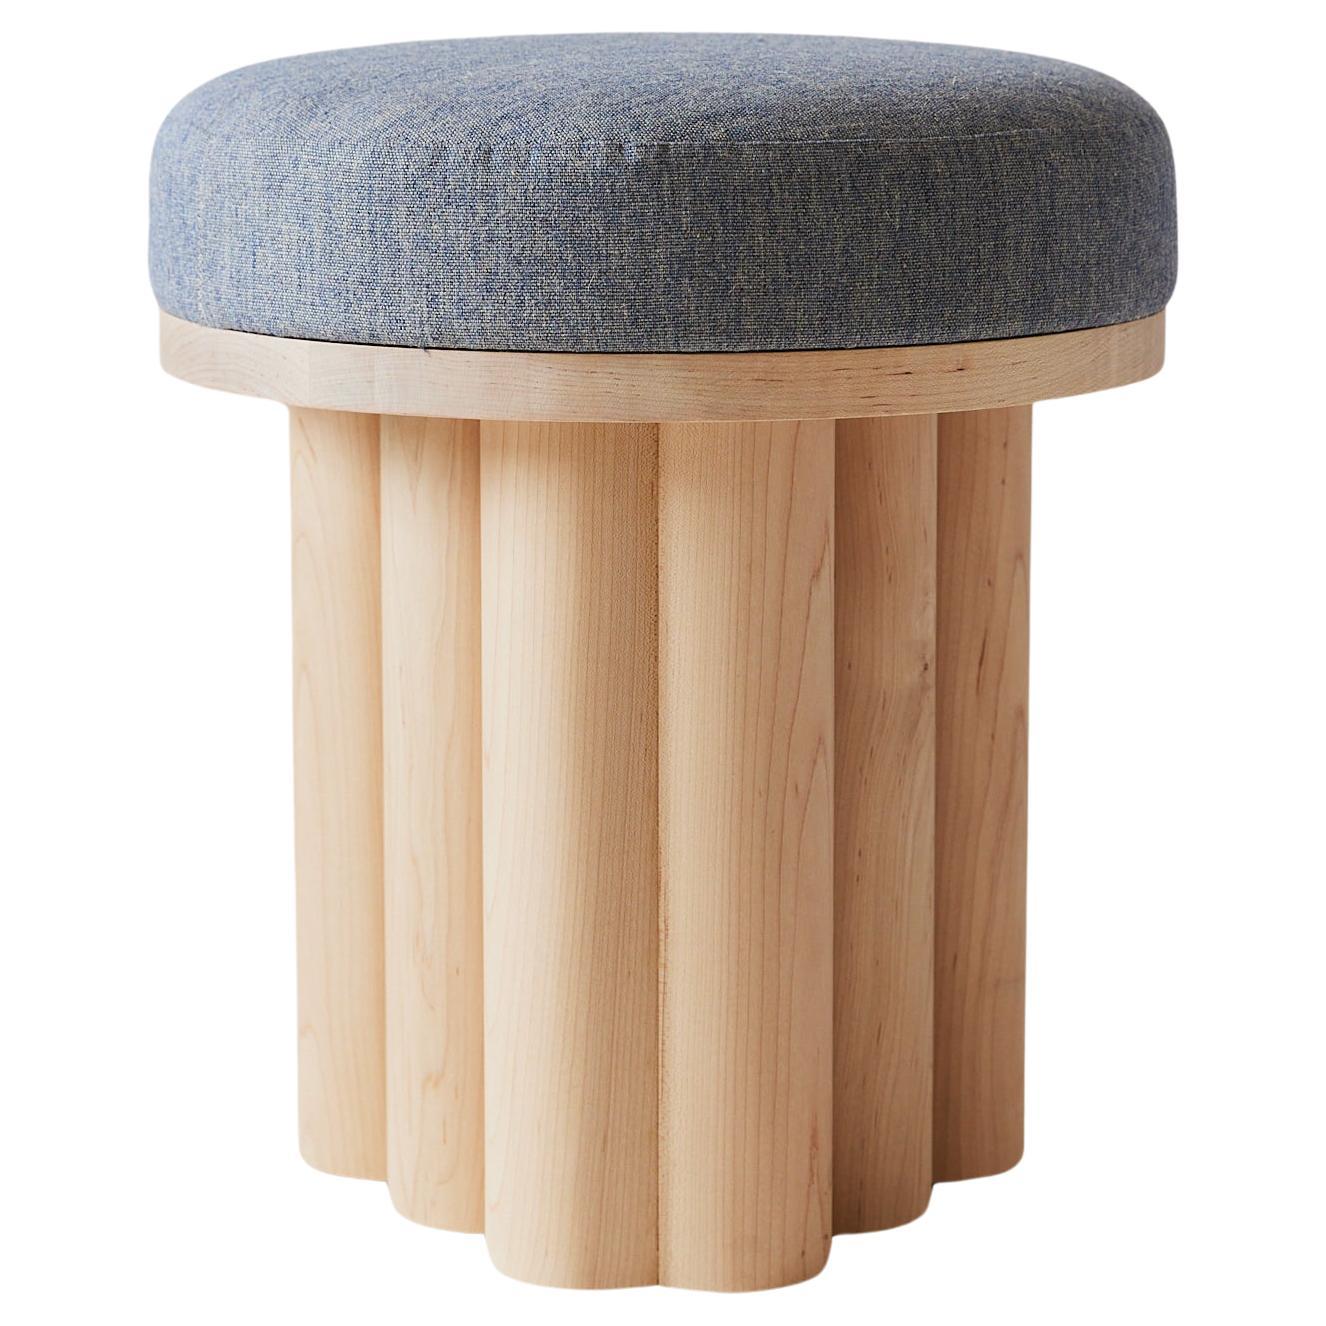 Doric Stool in Natural Maple with Light Blue Linen